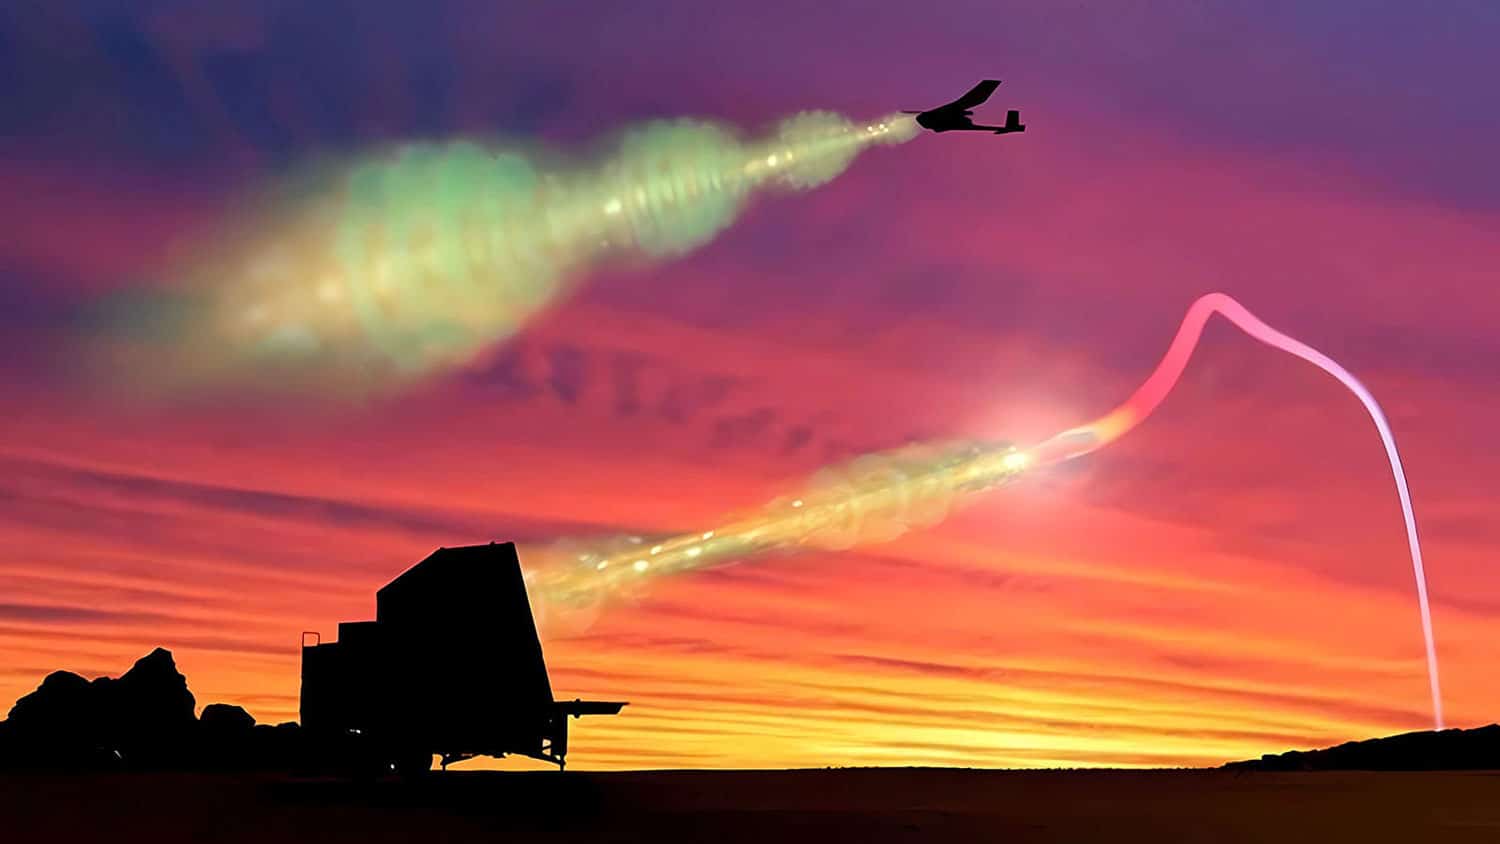 Defensive microwave antenna systems will use directed energy to defeat airborne threats.